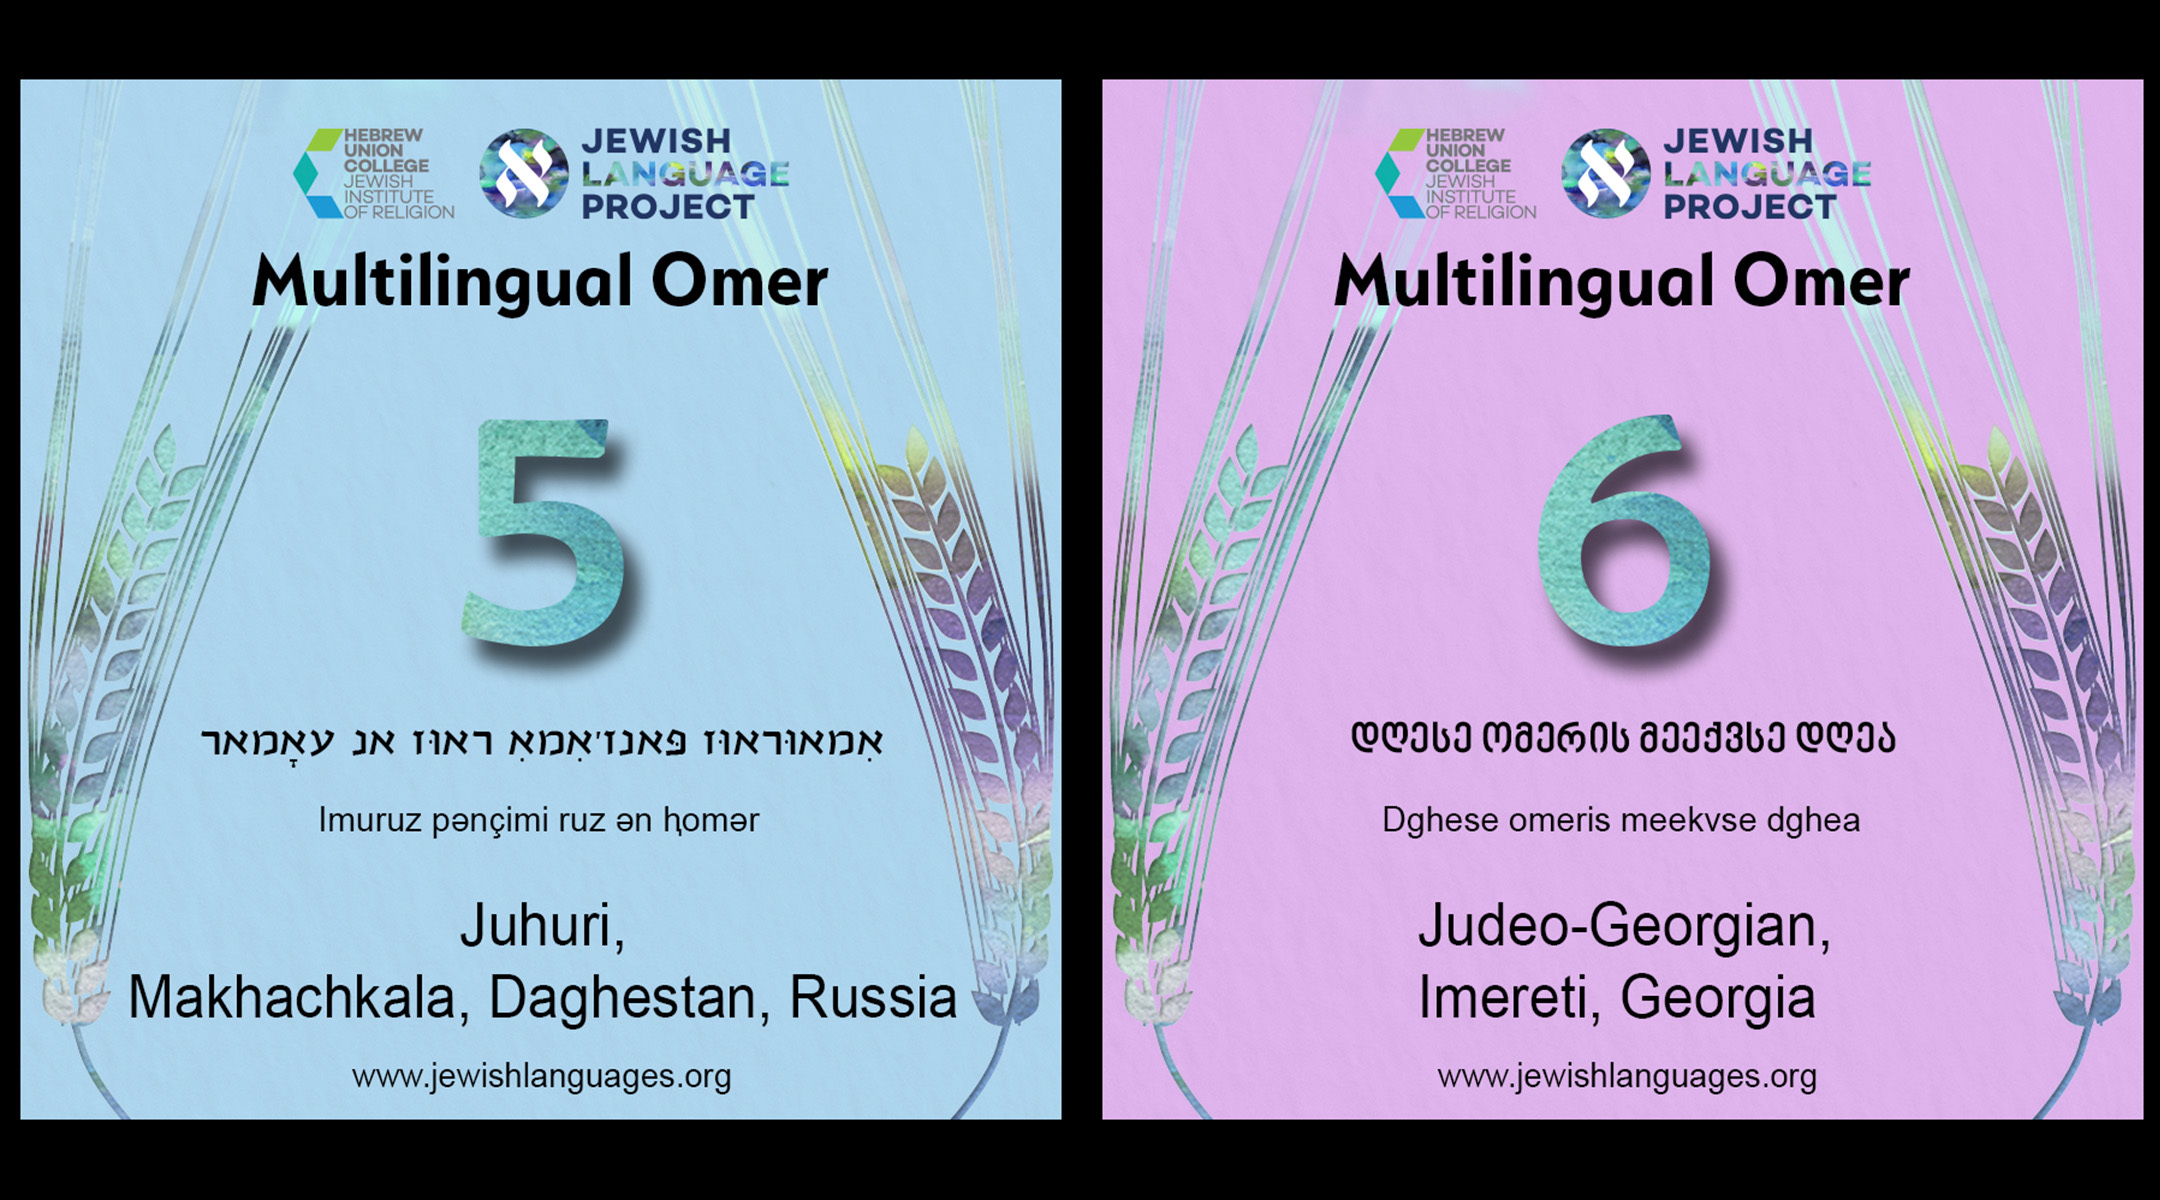 The HUC-JIR Jewish Language Project’s multilingual Omer counter highlights Jewish linguistic diversity by presenting each of the 49 days in a different language or dialect. (HUC-JIR)